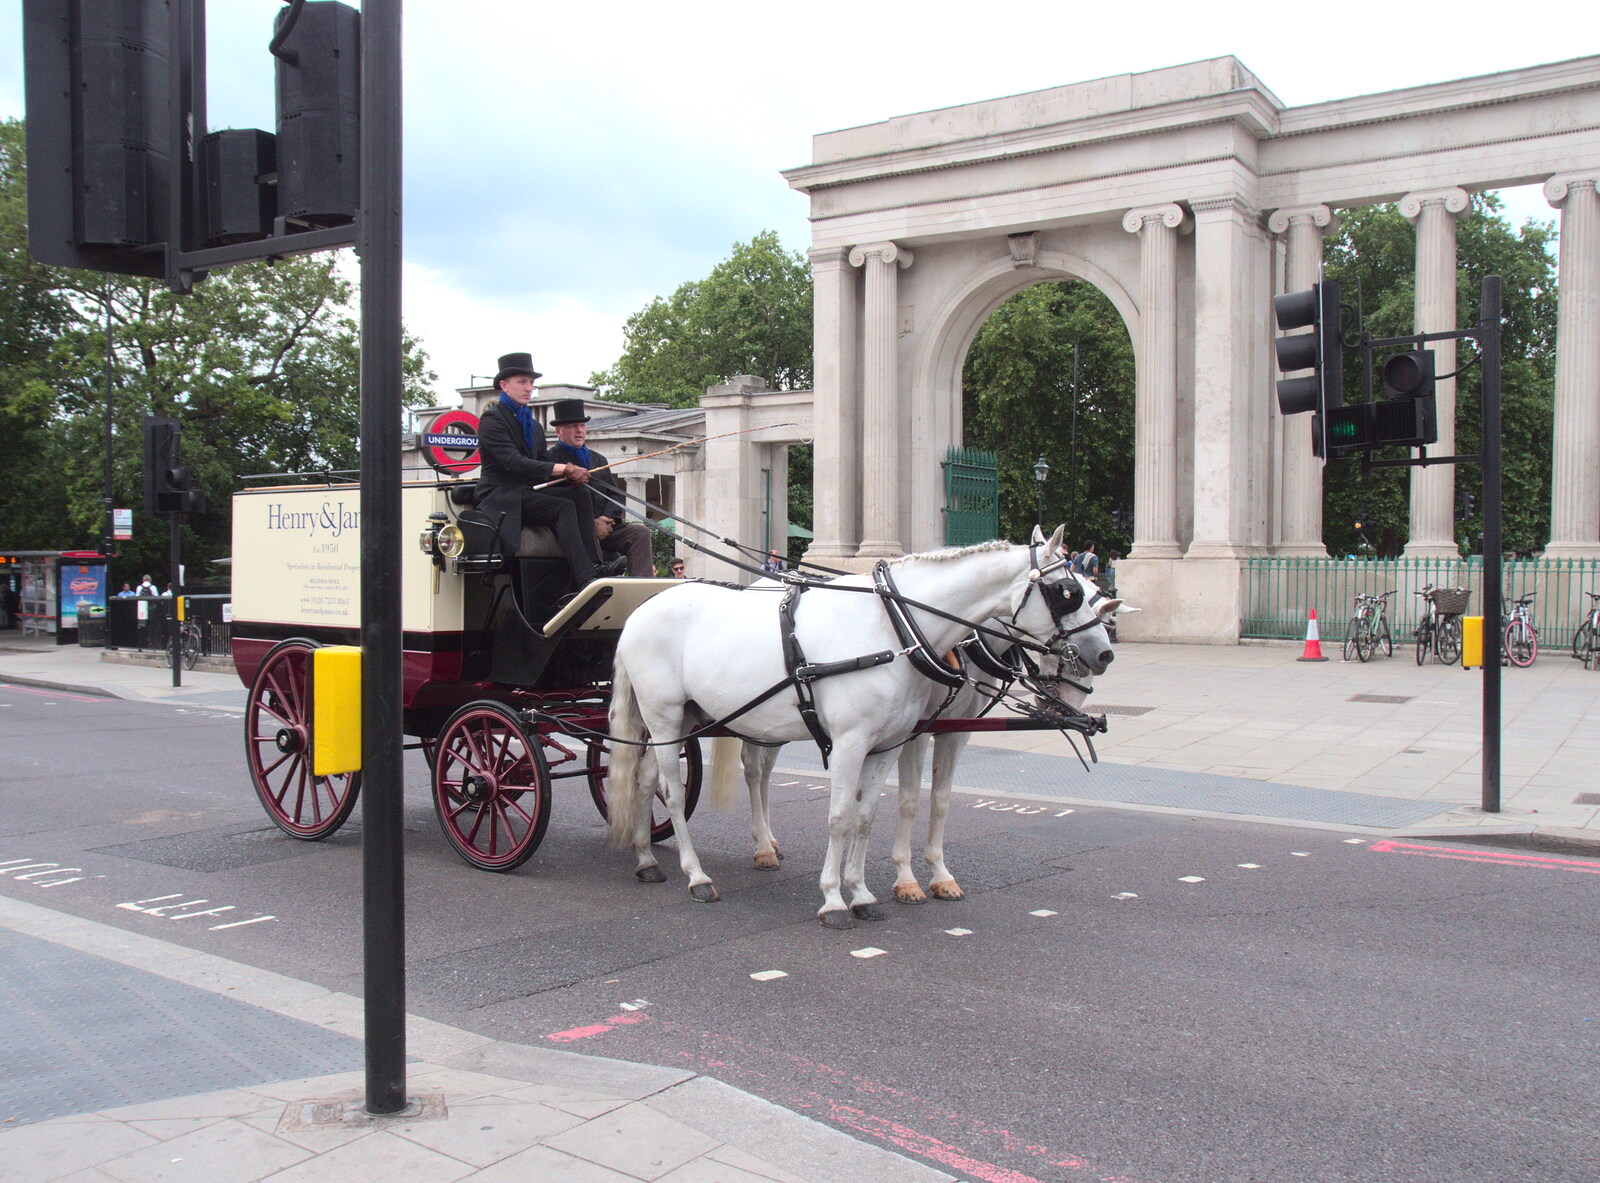 A horse and cart waits at the lights by Hyde Park from SwiftKey's Hundred Million, Paddington, London - 13th June 2018